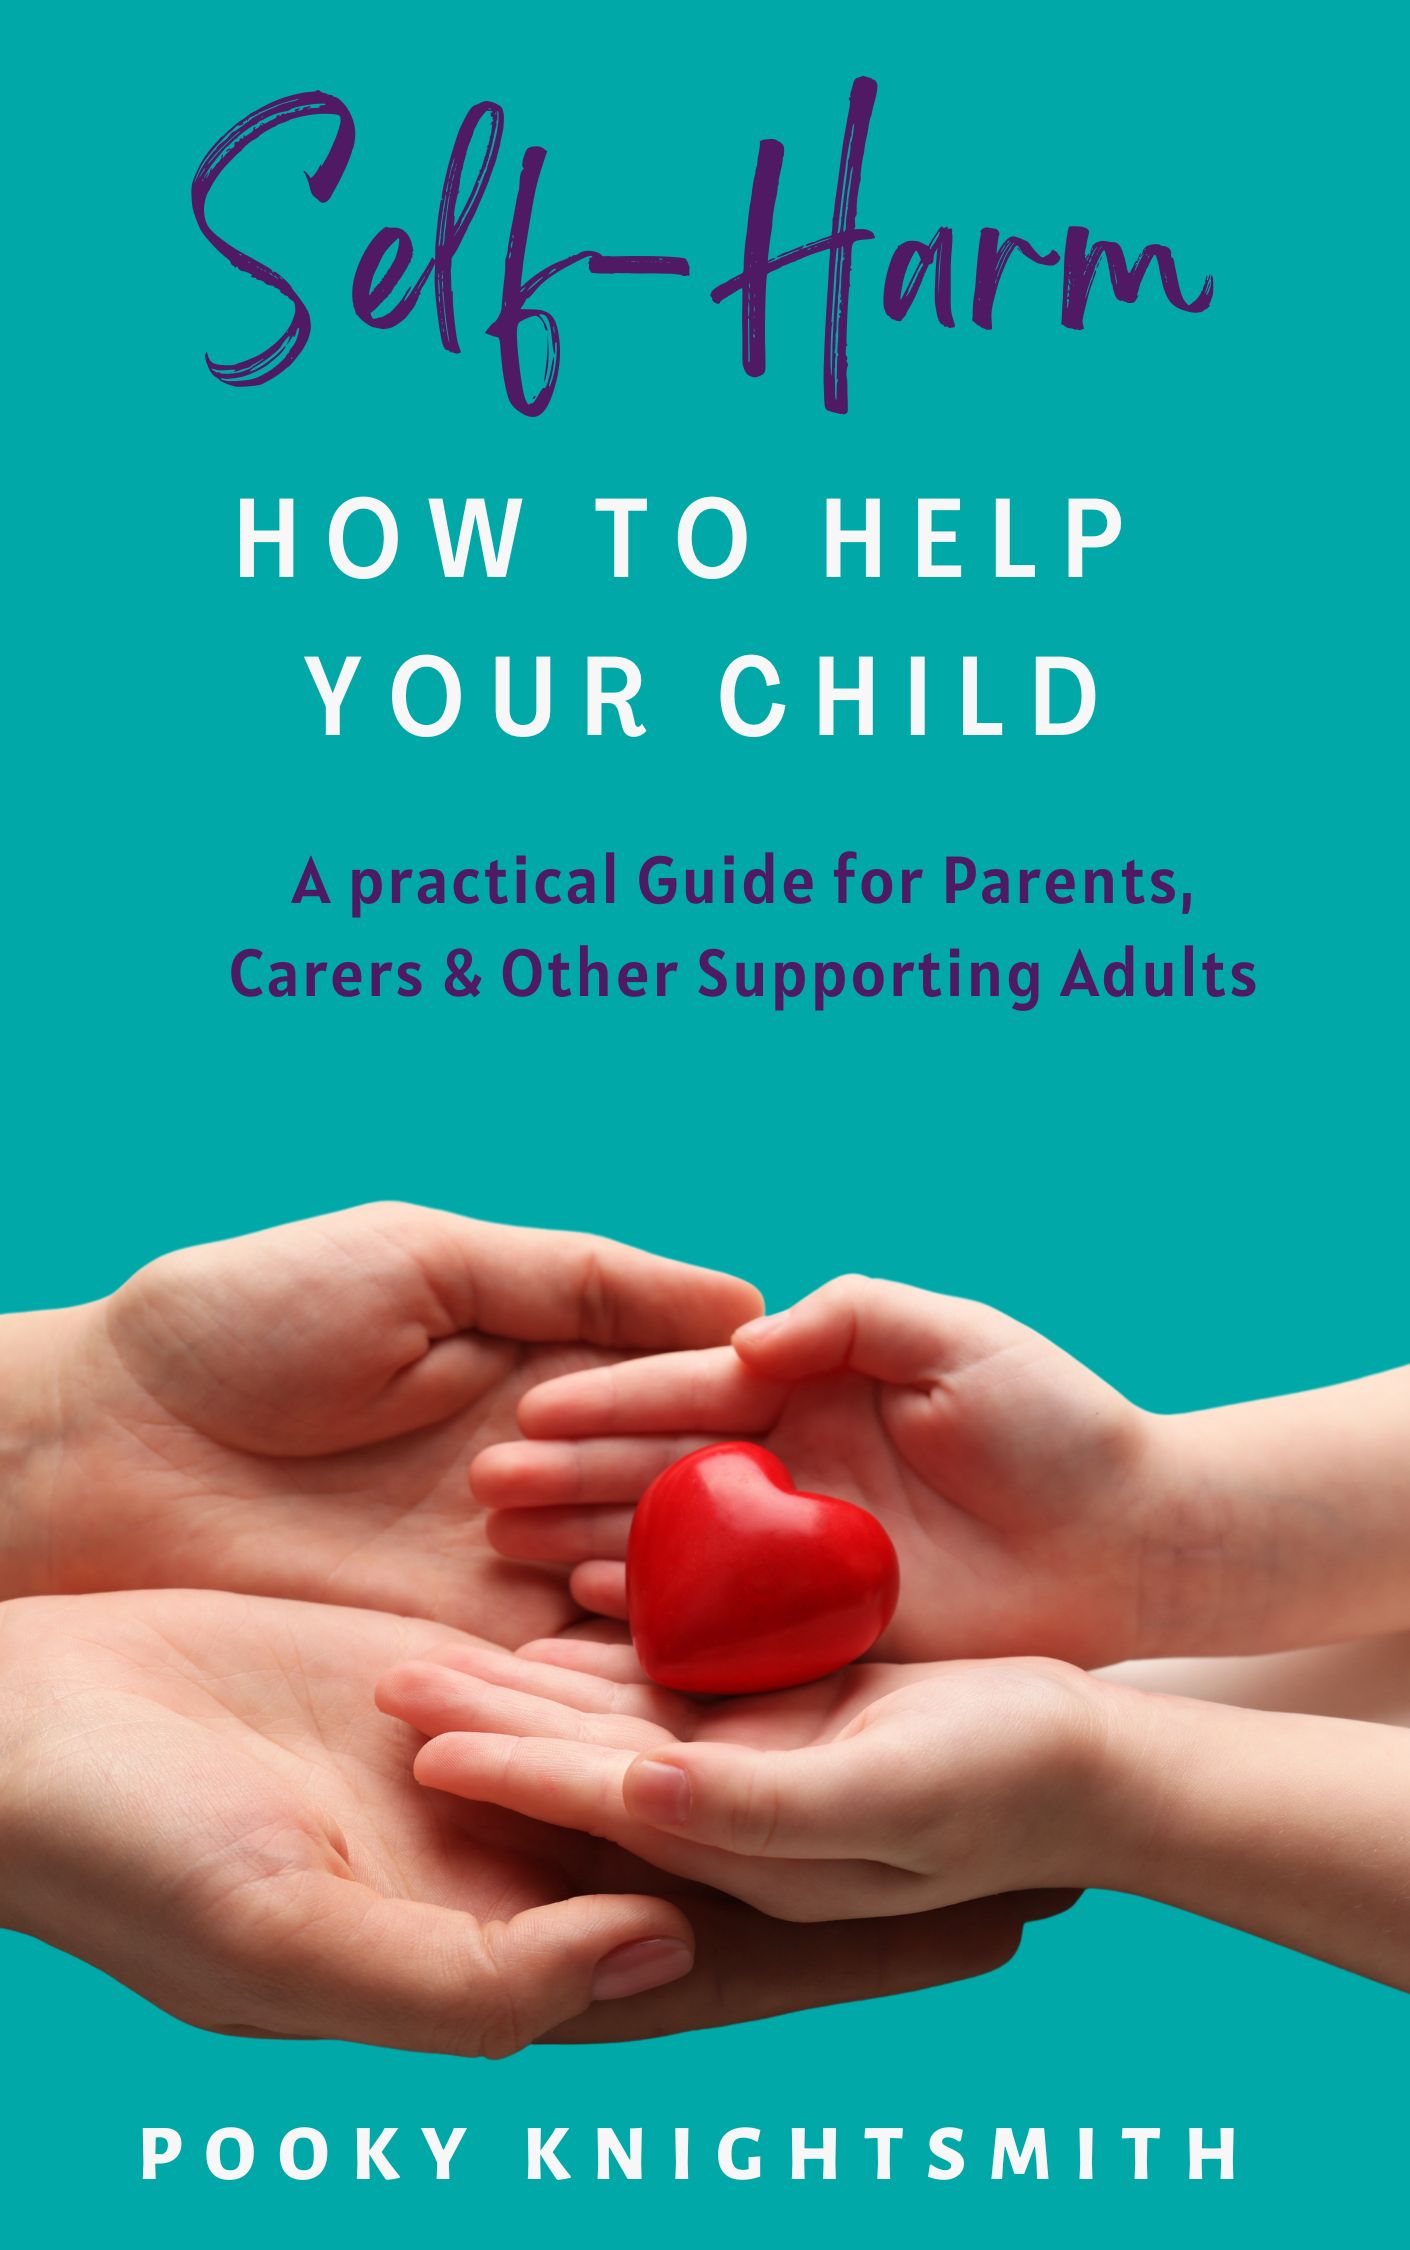 Book cover of 'Self-Harm: How to help your child'